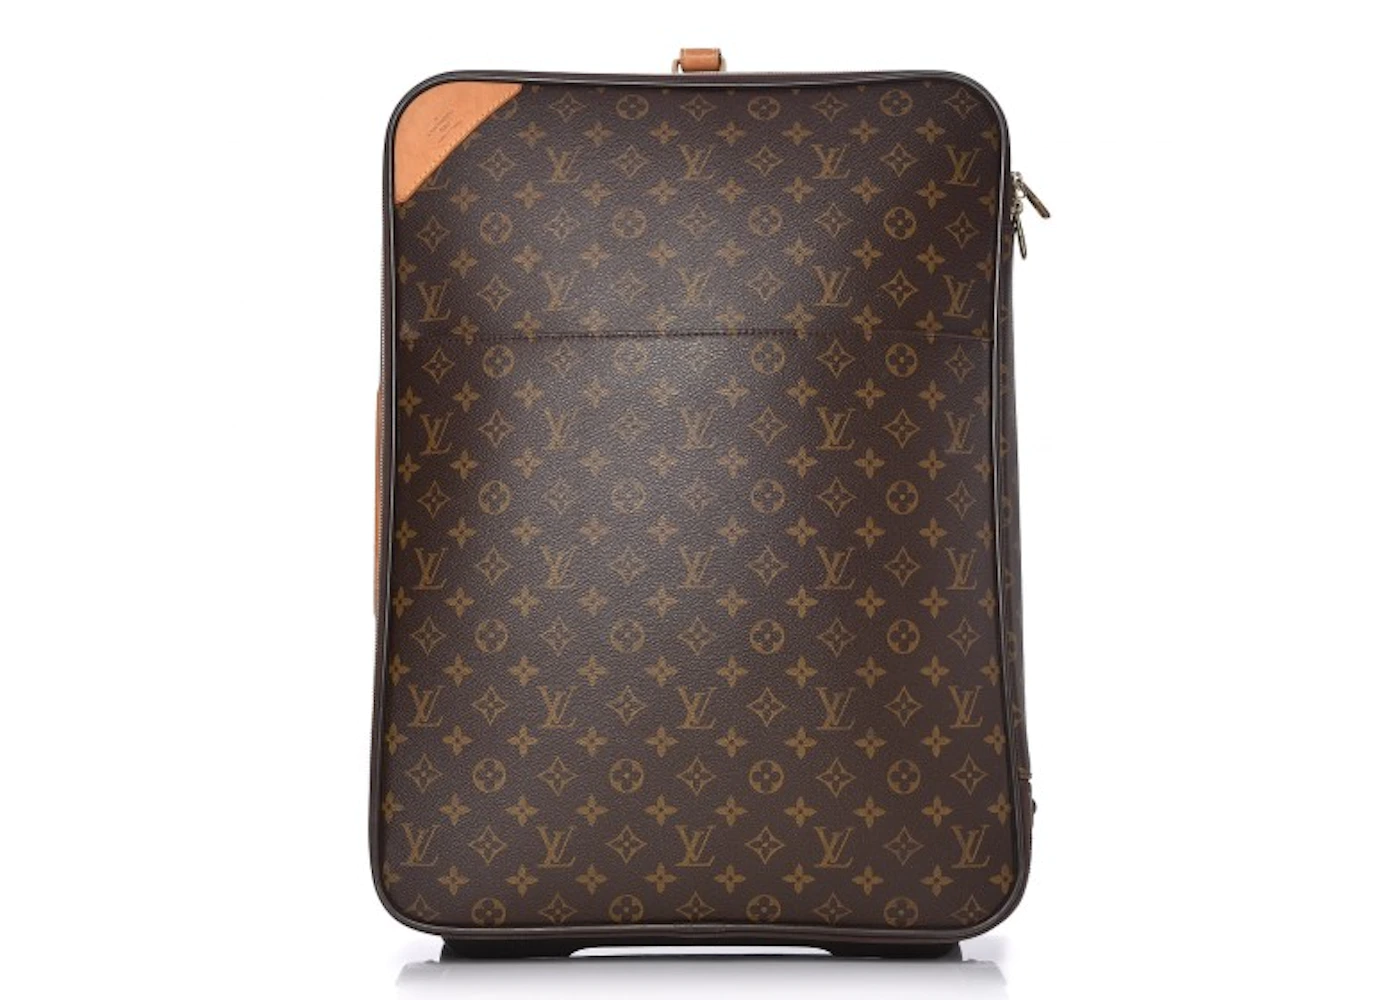 Women's Louis Vuitton Luggage and suitcases from $998